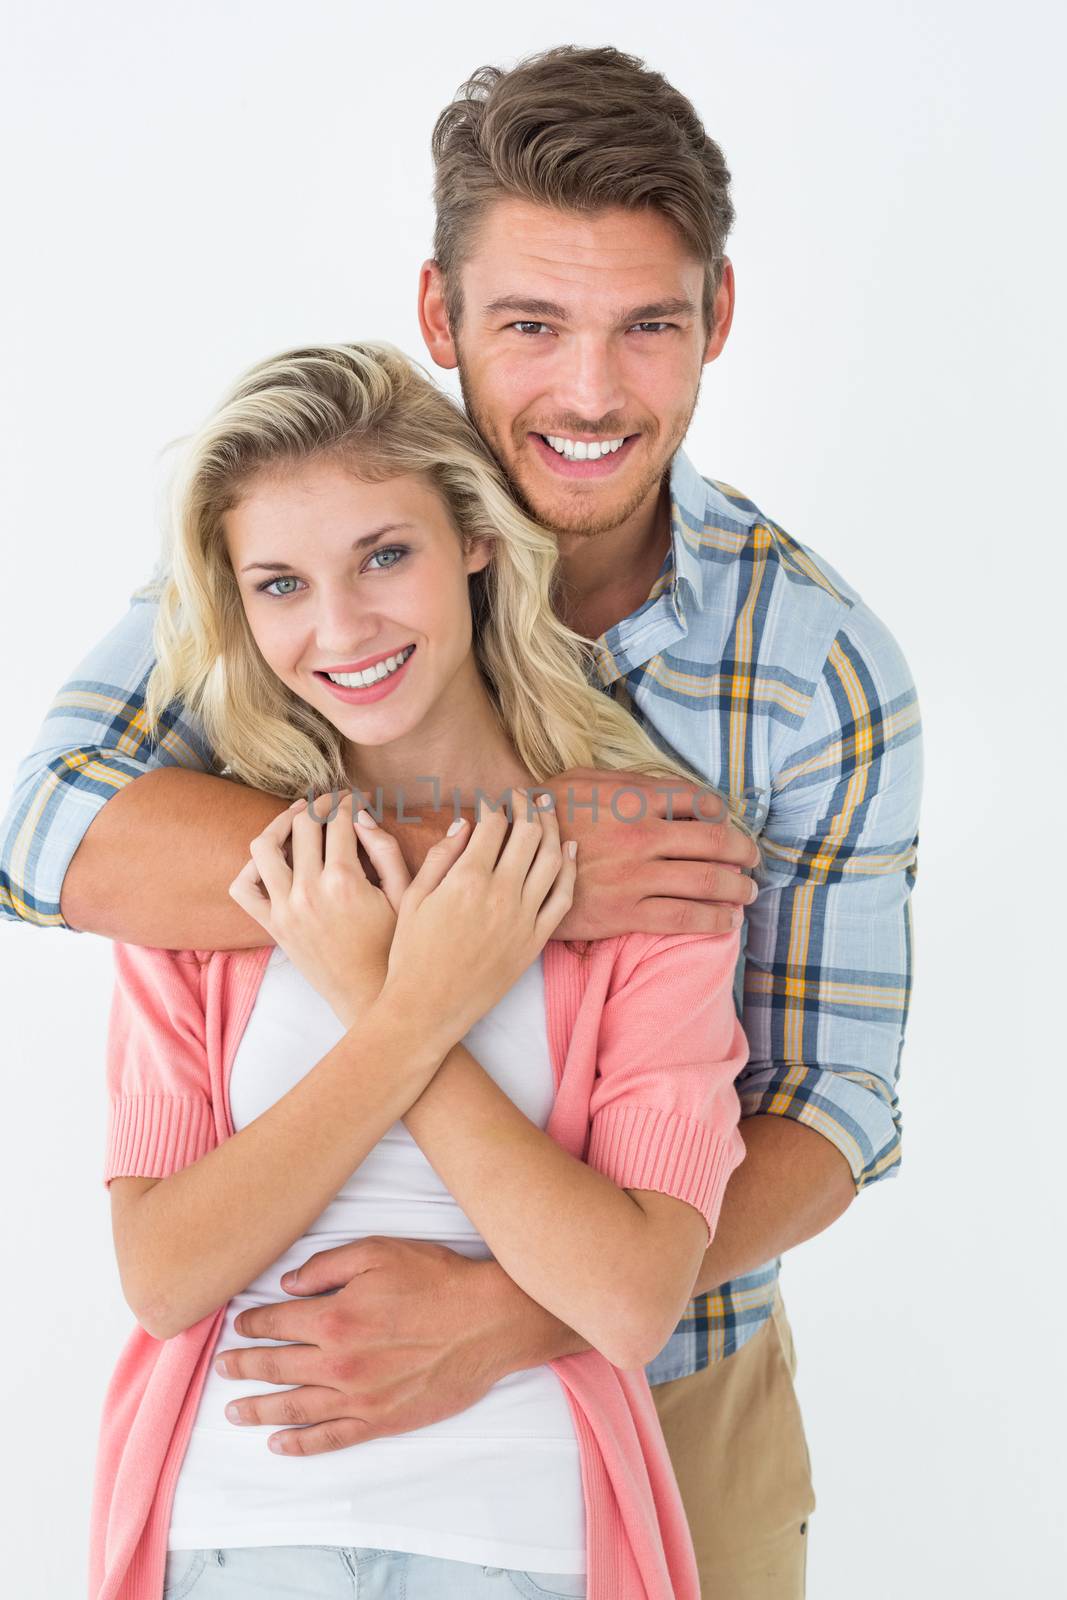 Portrait of young man embracing happy woman from behind over white background